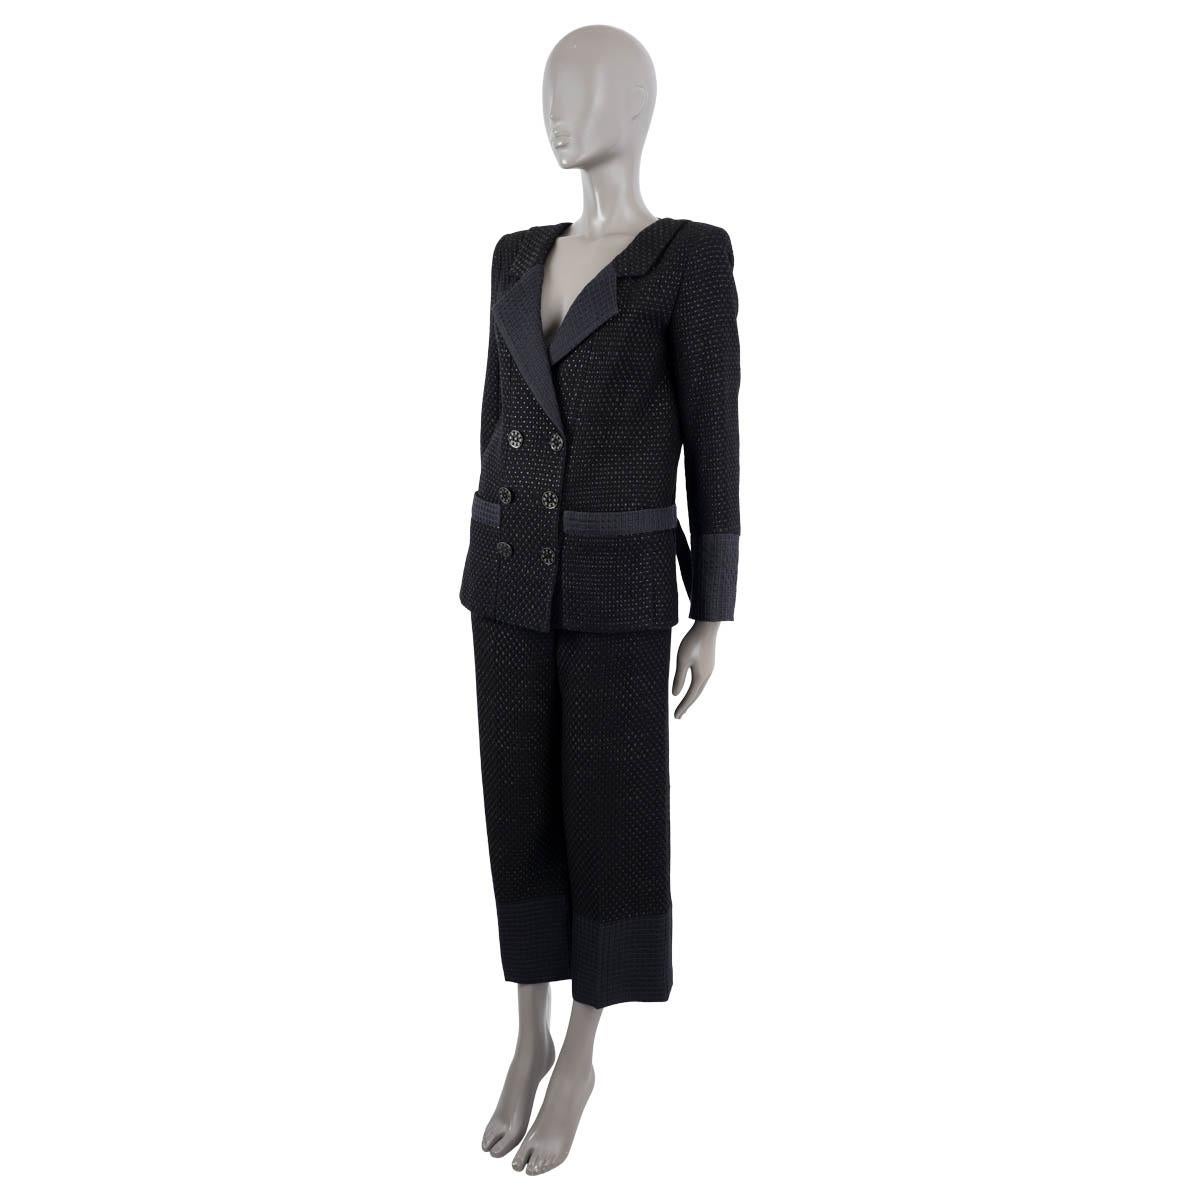 100% authentic Chanel double-breated pant suit in black tweed and midnight blue cotton (70%) and polyester (30%). The design features six CC logo and Camellia embellished black buttons and three on each cuff. Classic notch lapel and two patch